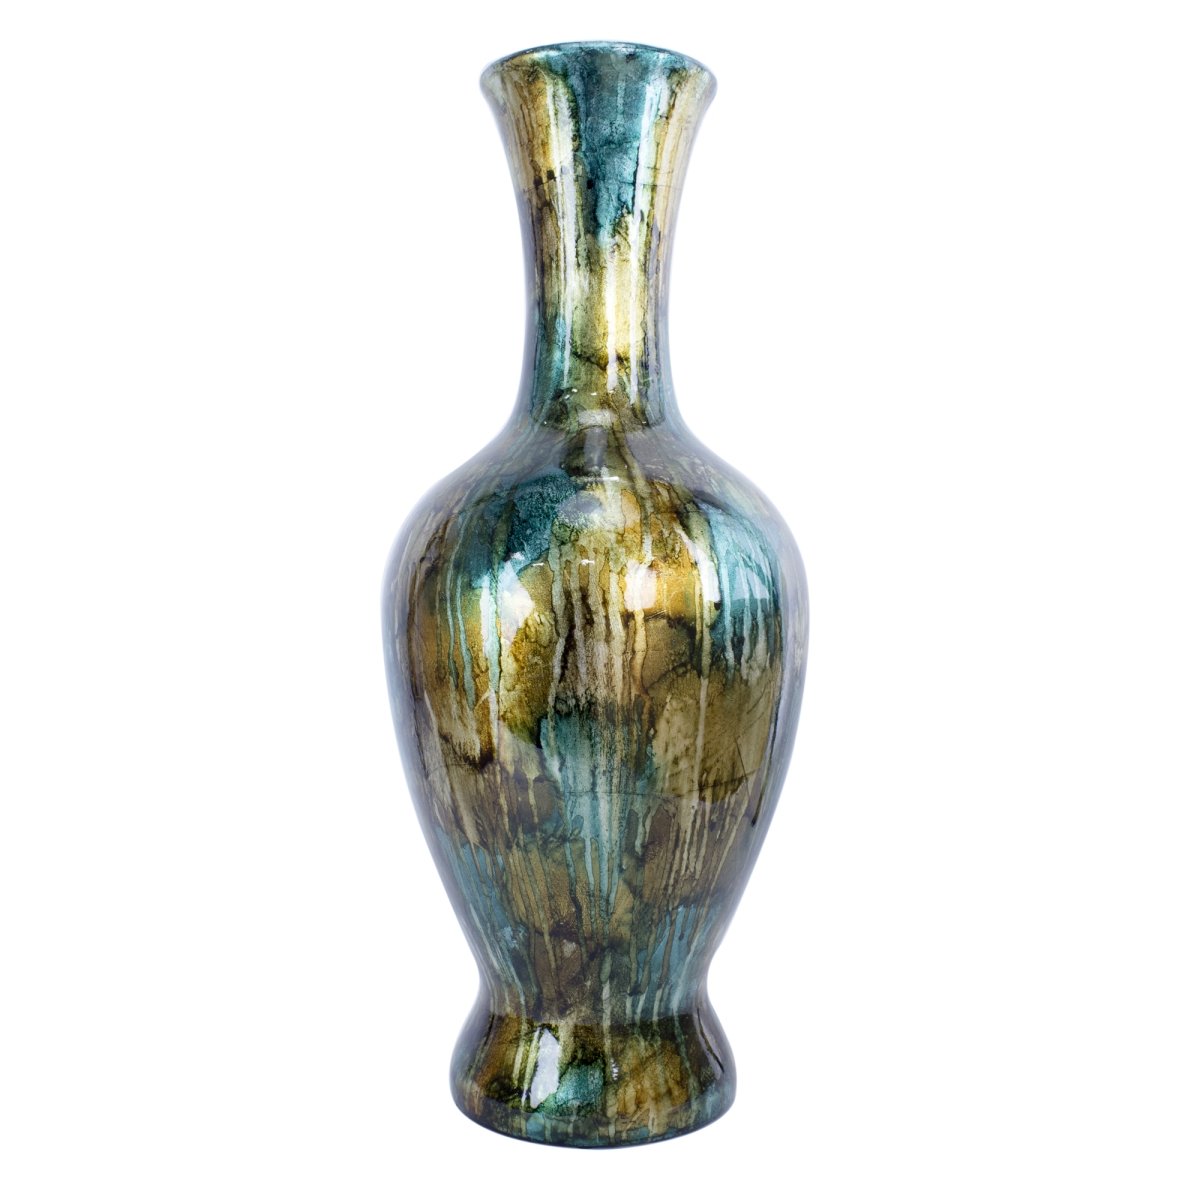 W1305-04 20 In. Mary Foiled & Lacquered Ceramic Vase